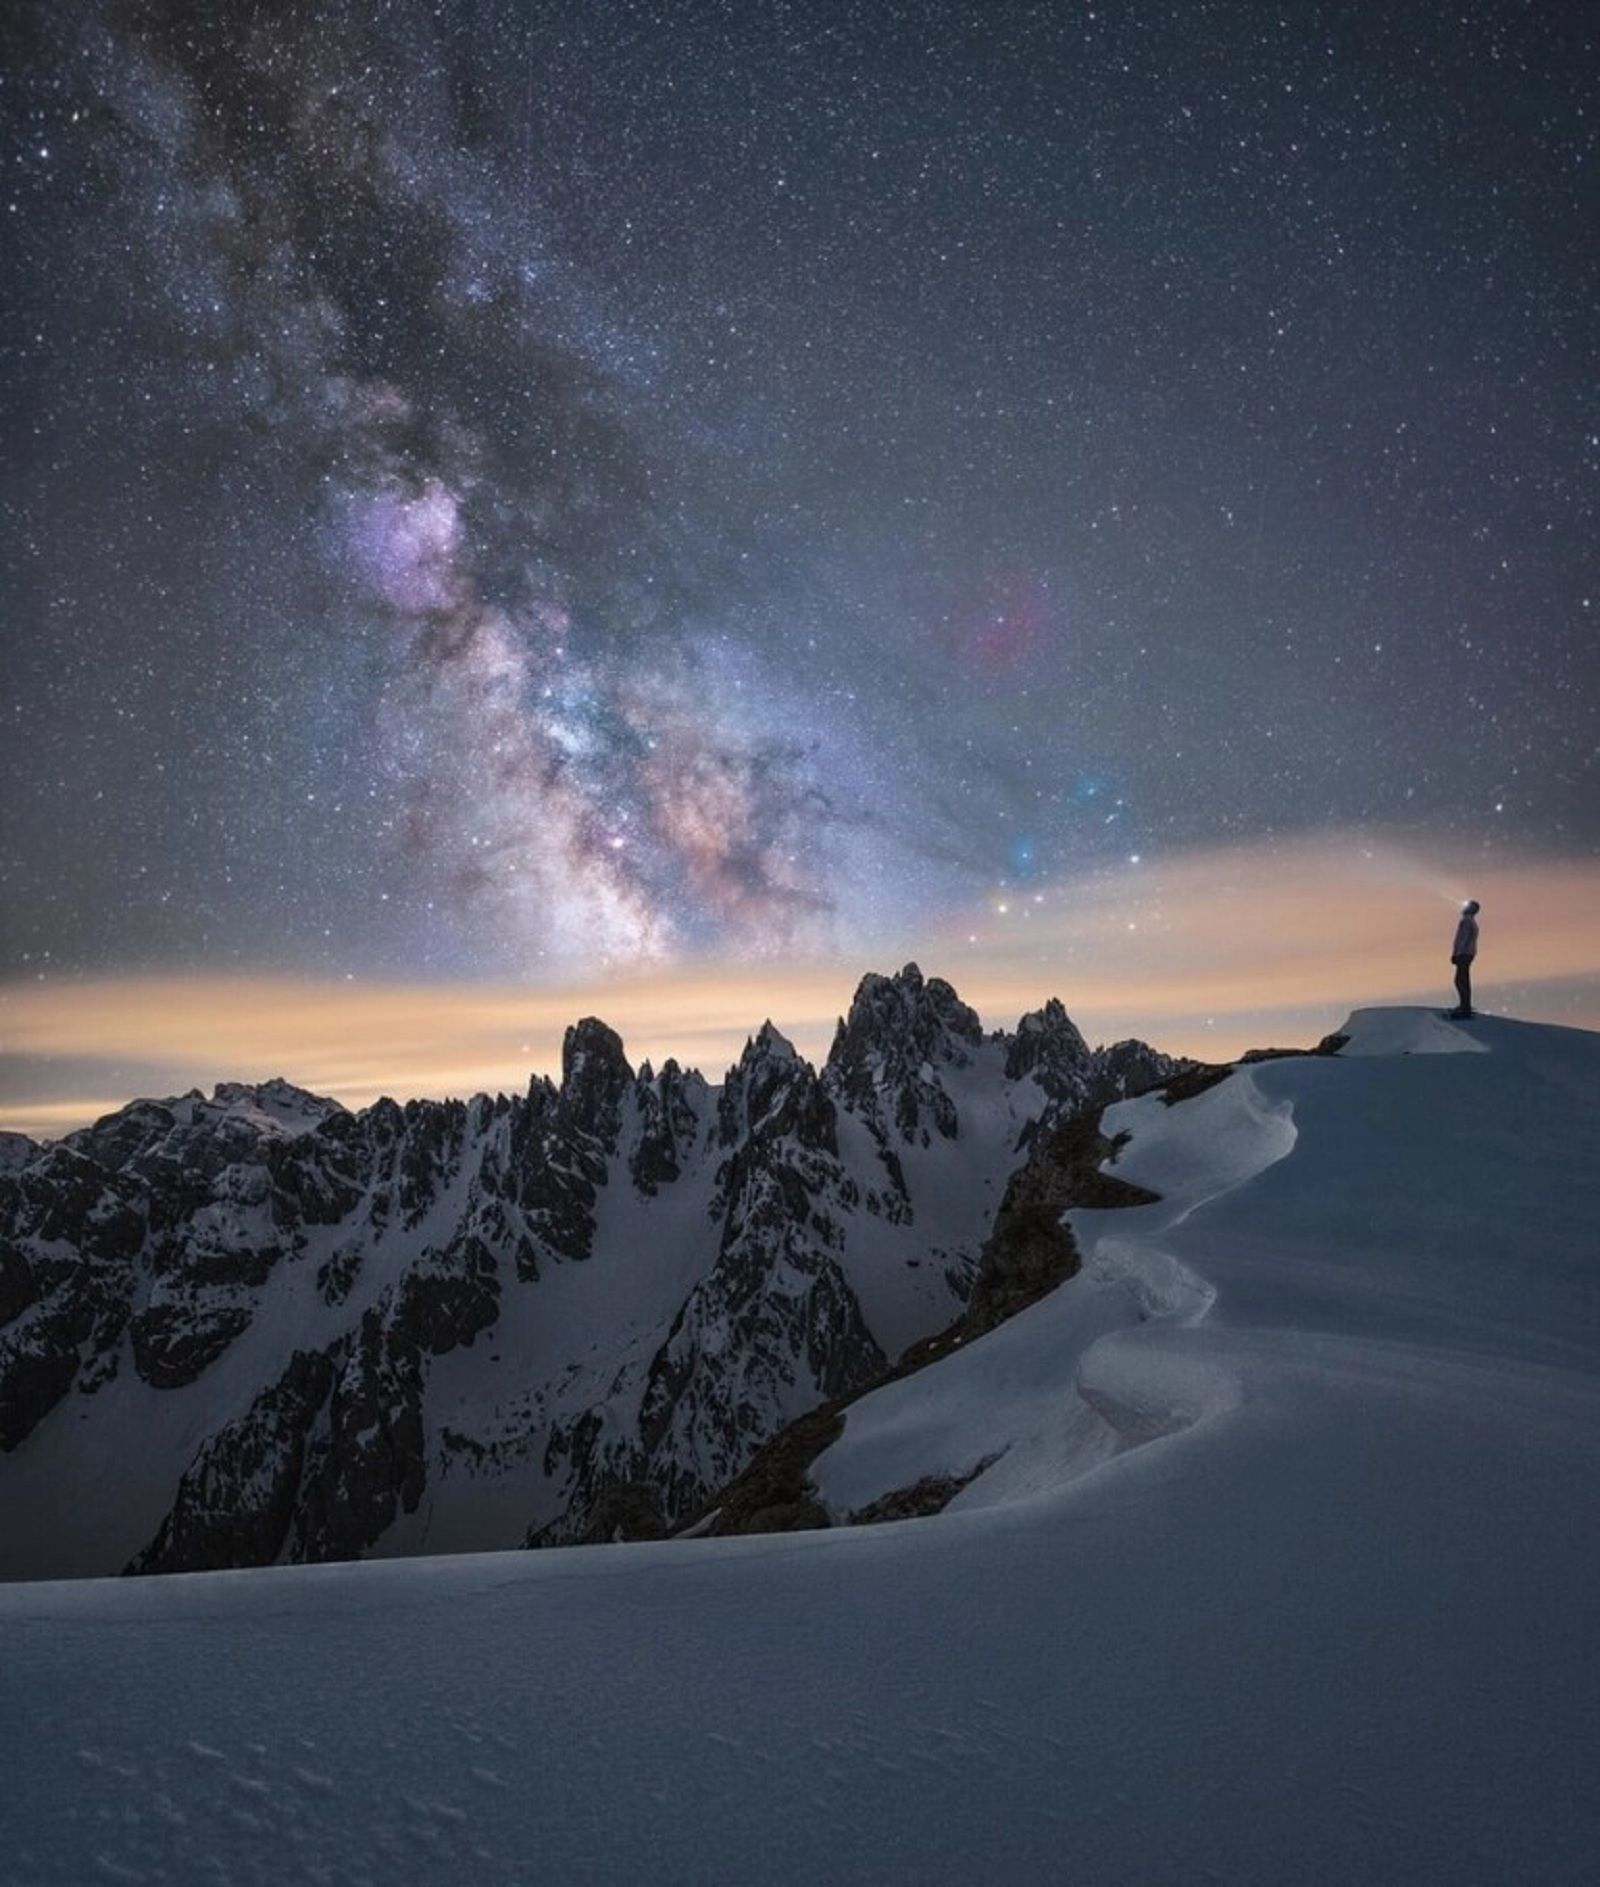 Amazing photos from the Milk Way Photographer of the Year competition 2021 photo 1